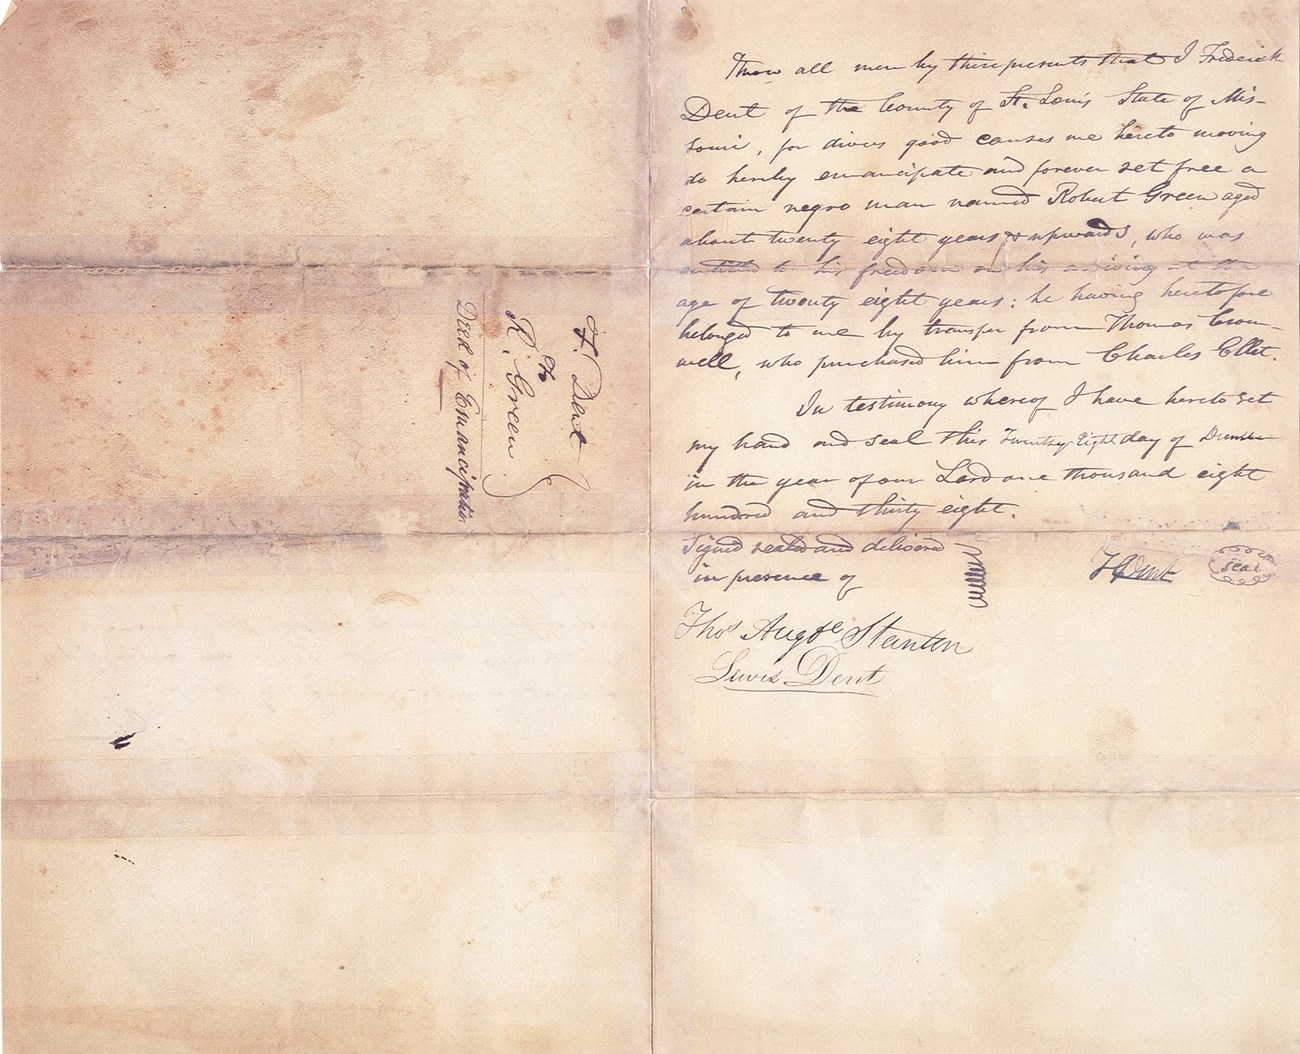 Manumission paper signed by Col. Frederick F. Dent freeing Robert Green in 1838.